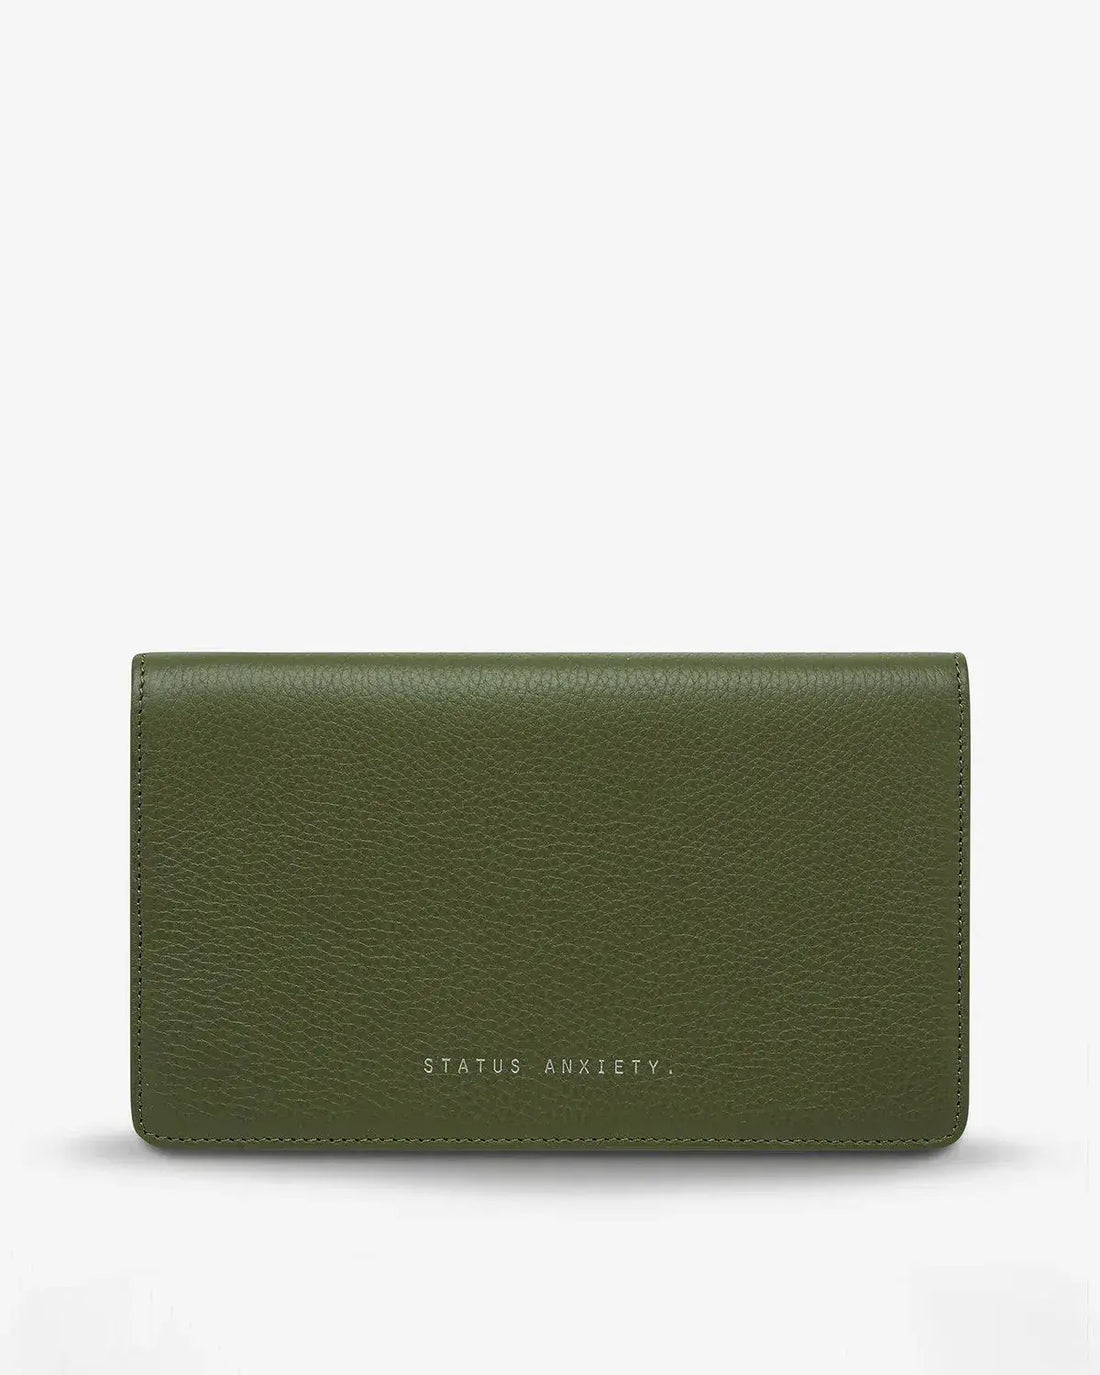 Status Anxiety Living Proof Leather Wallet - Khaki